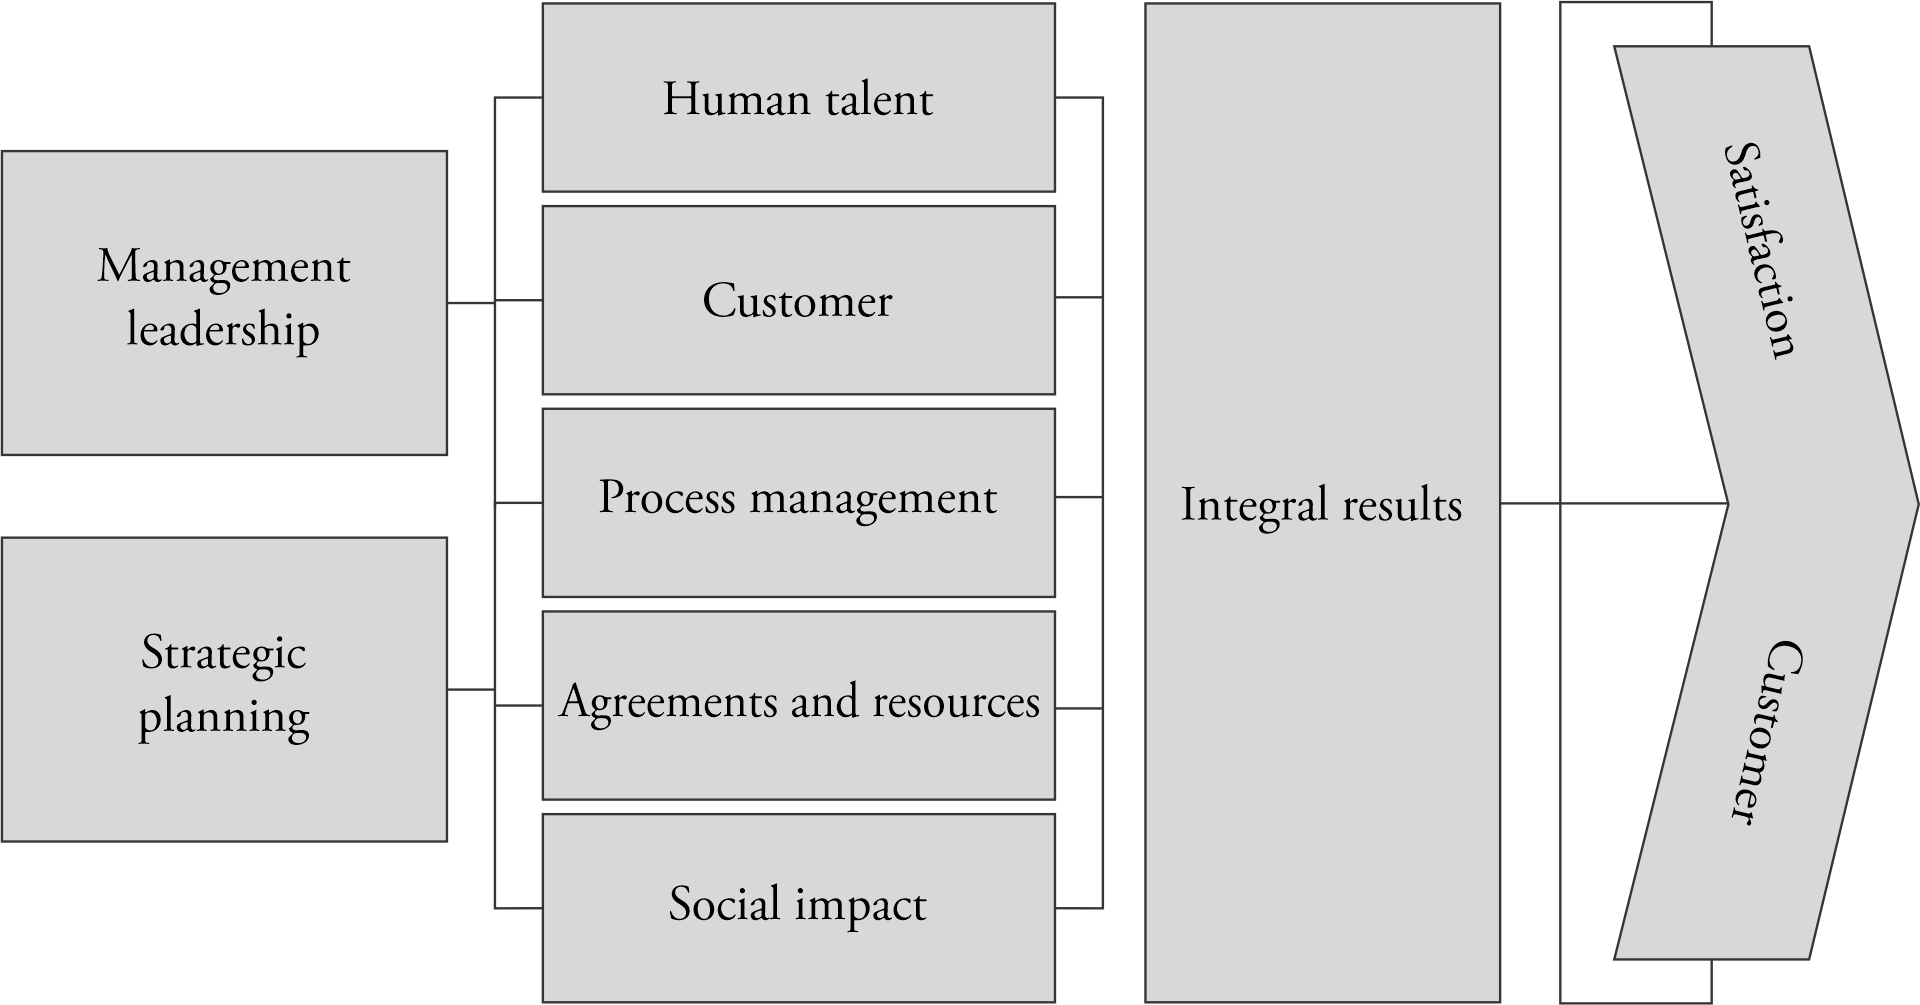 Structure of the Quality Management Model